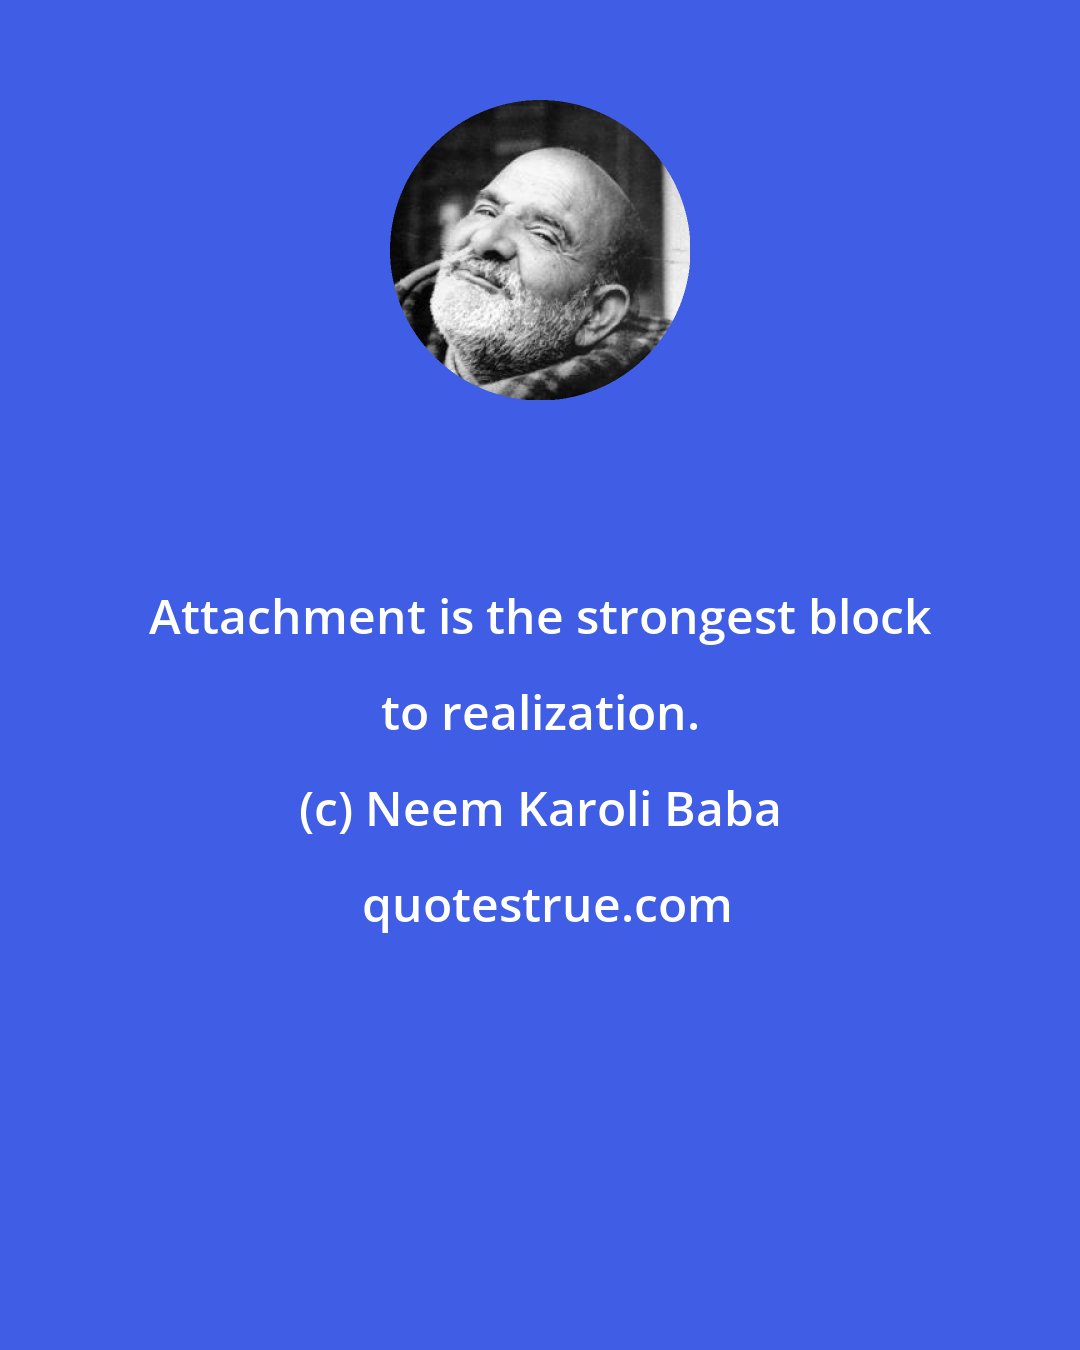 Neem Karoli Baba: Attachment is the strongest block to realization.